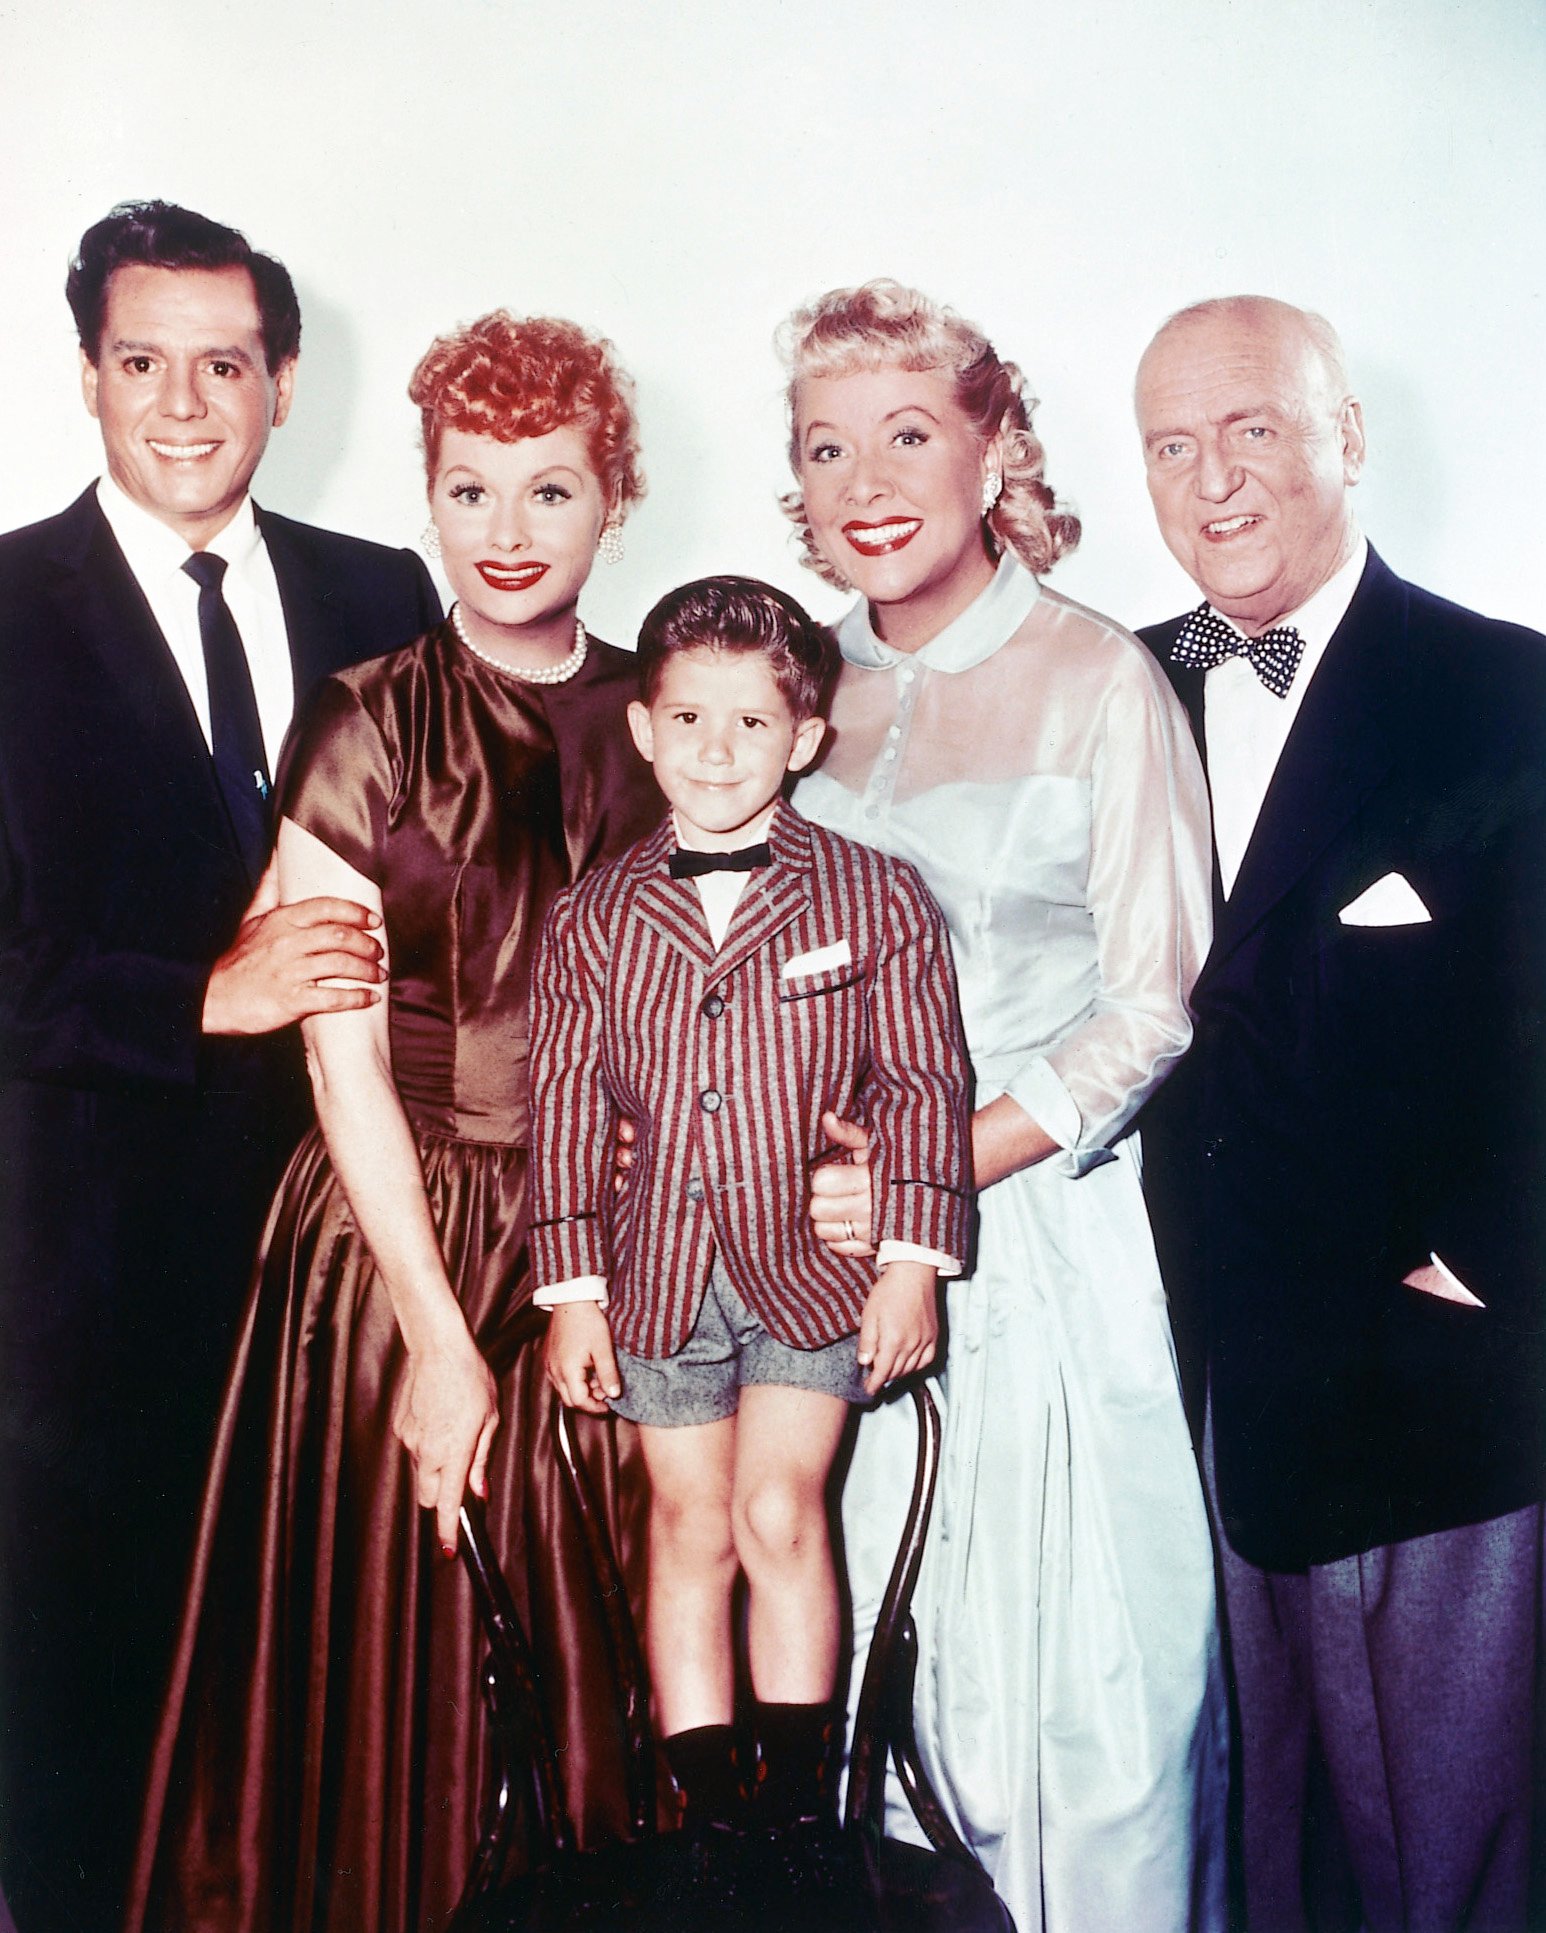 Keith Thibodeaux, center, with the cast of 'I Love Lucy' circa 1955